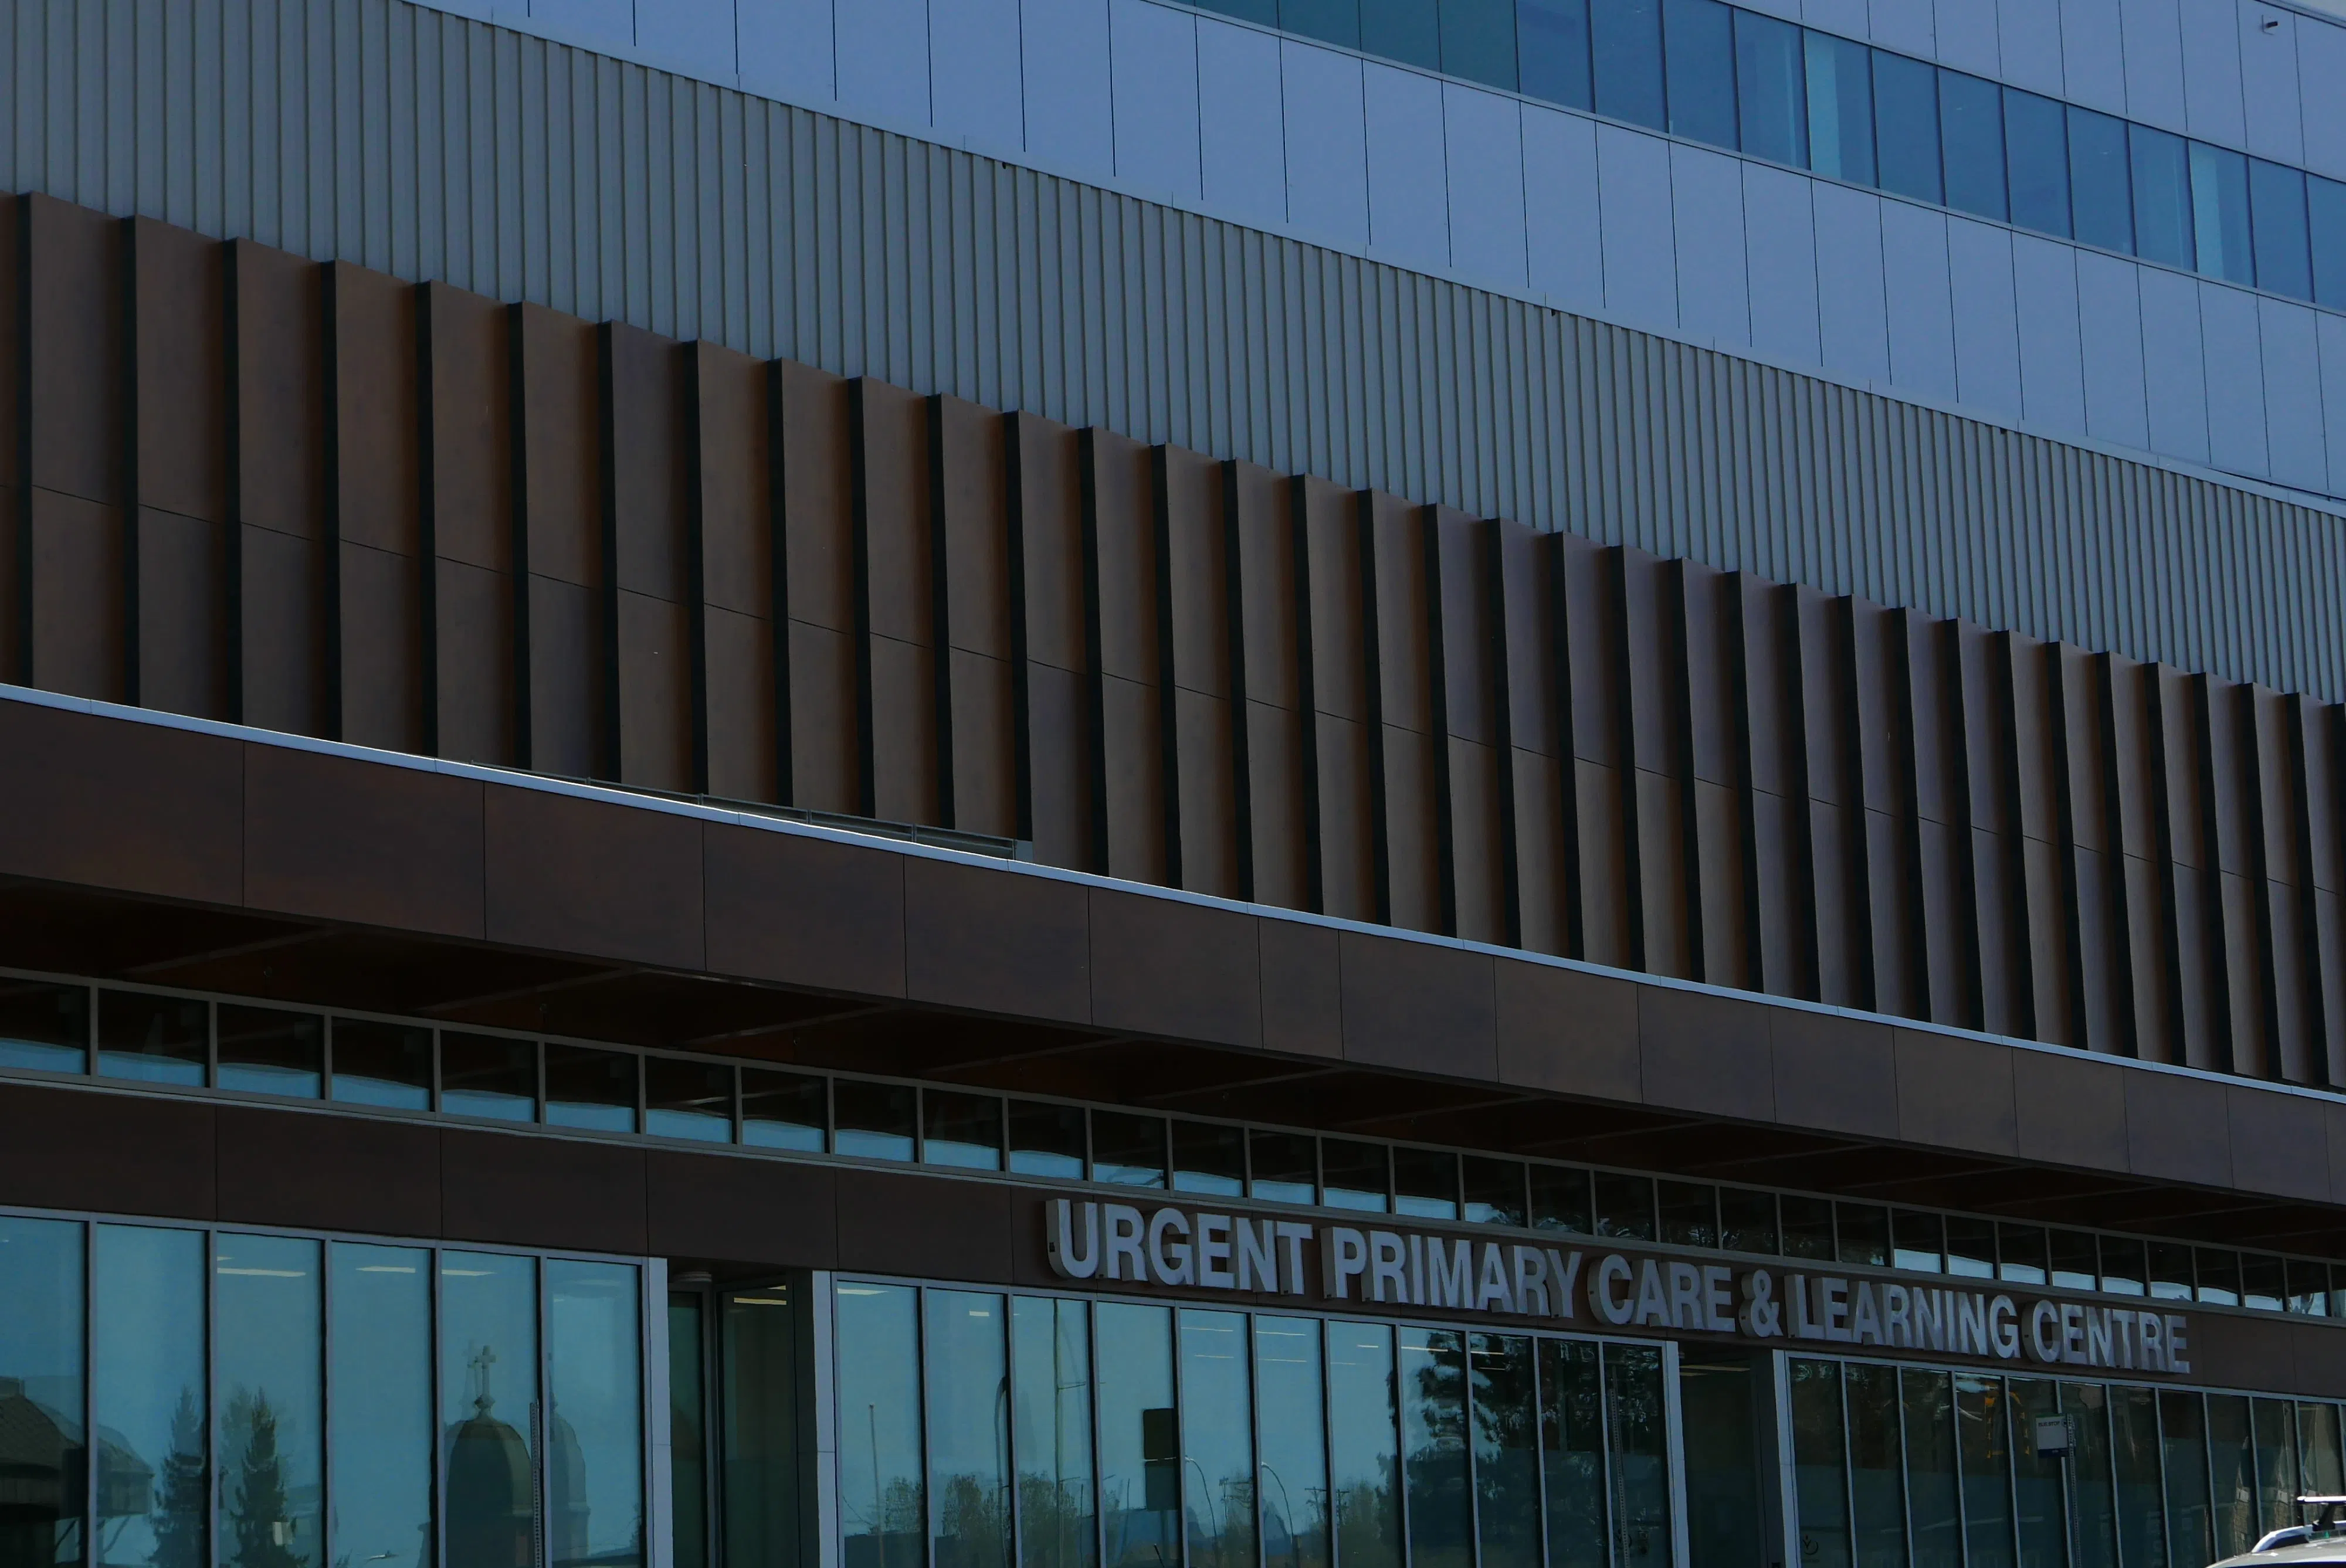 New non-emergency medical facility planned for Kamloops north shore